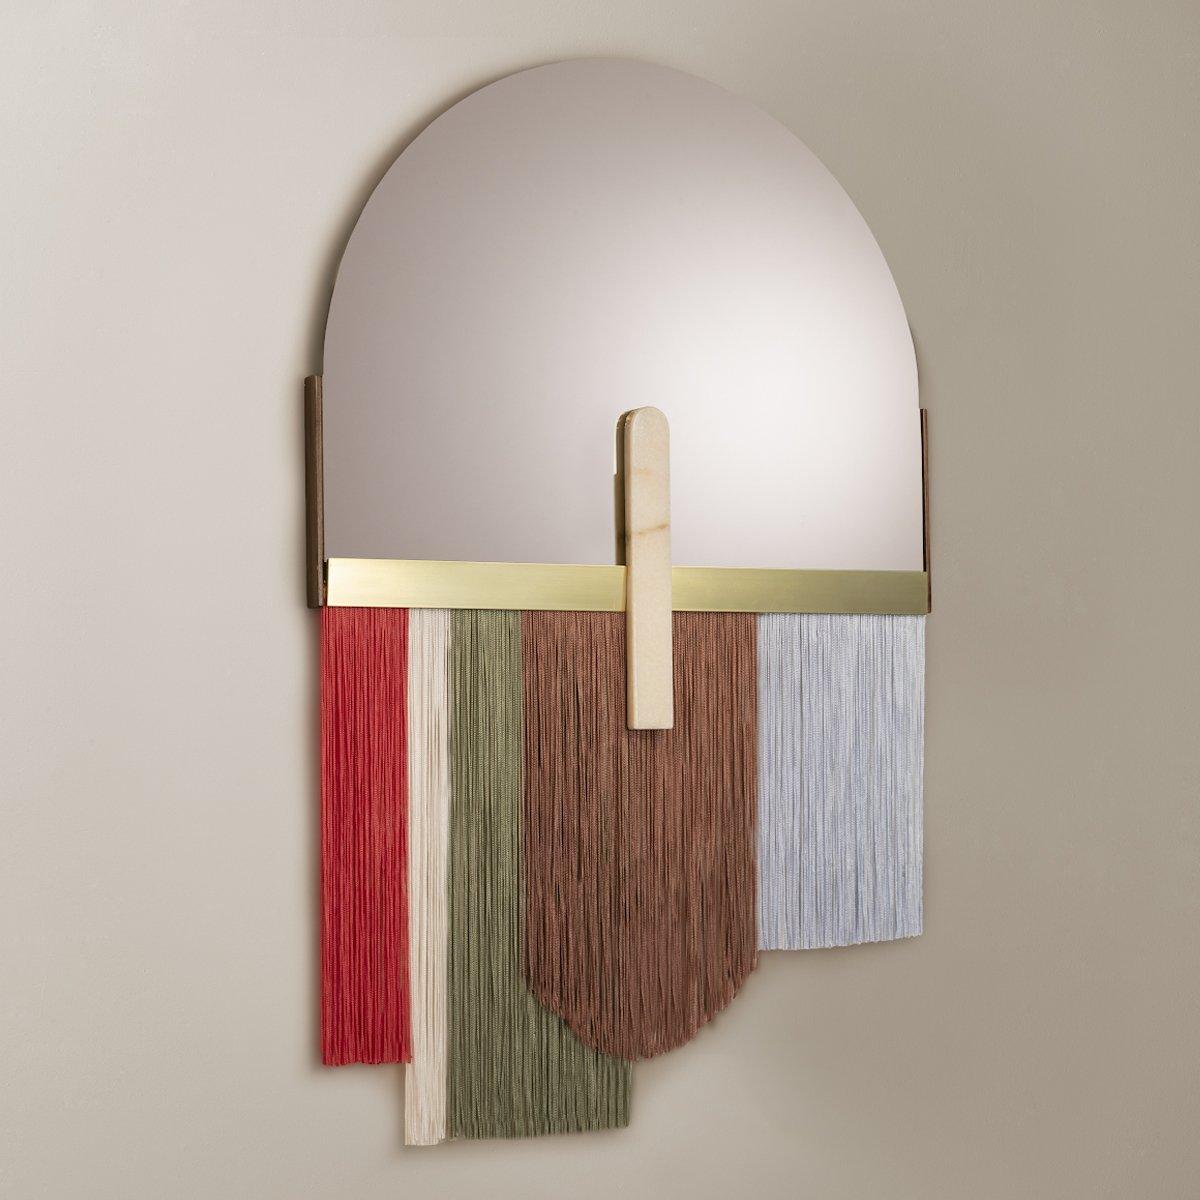 Ensemble of Three Colorful Wall Mirrors by Dooq 3